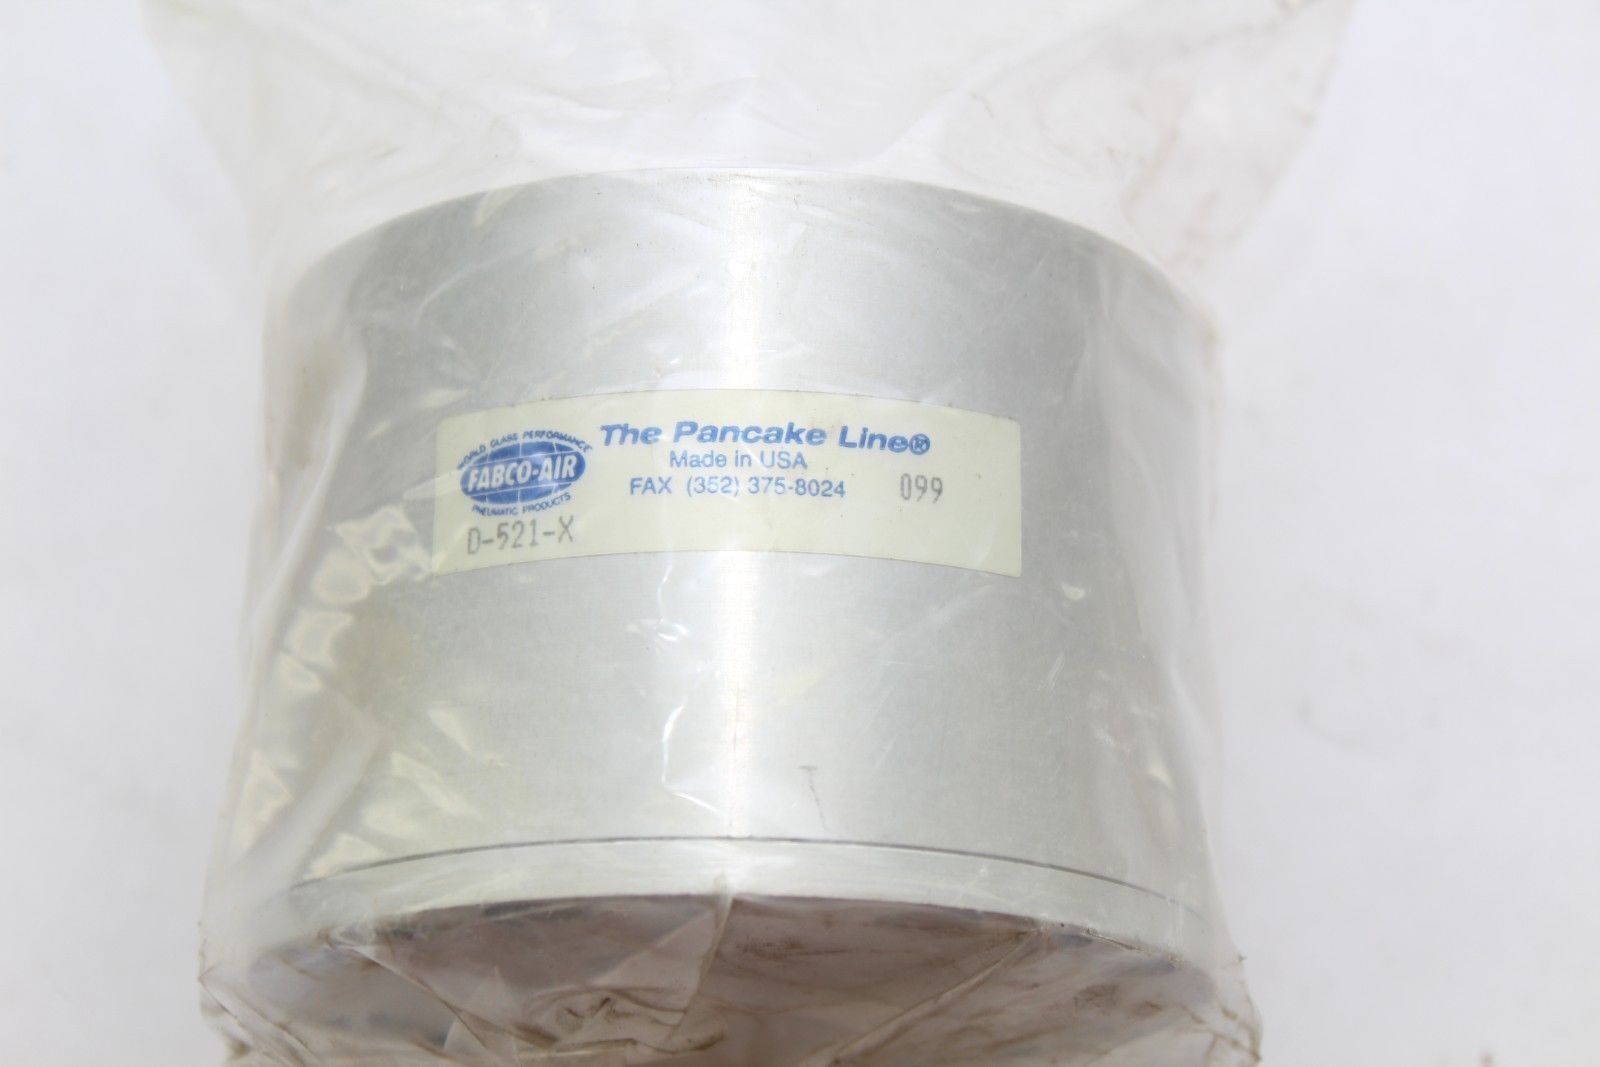 NEW! FABCO-AIR PANCAKE LINE D521-X 099 STAINLESS CYLINDER FAST SHIP! (F211) 1